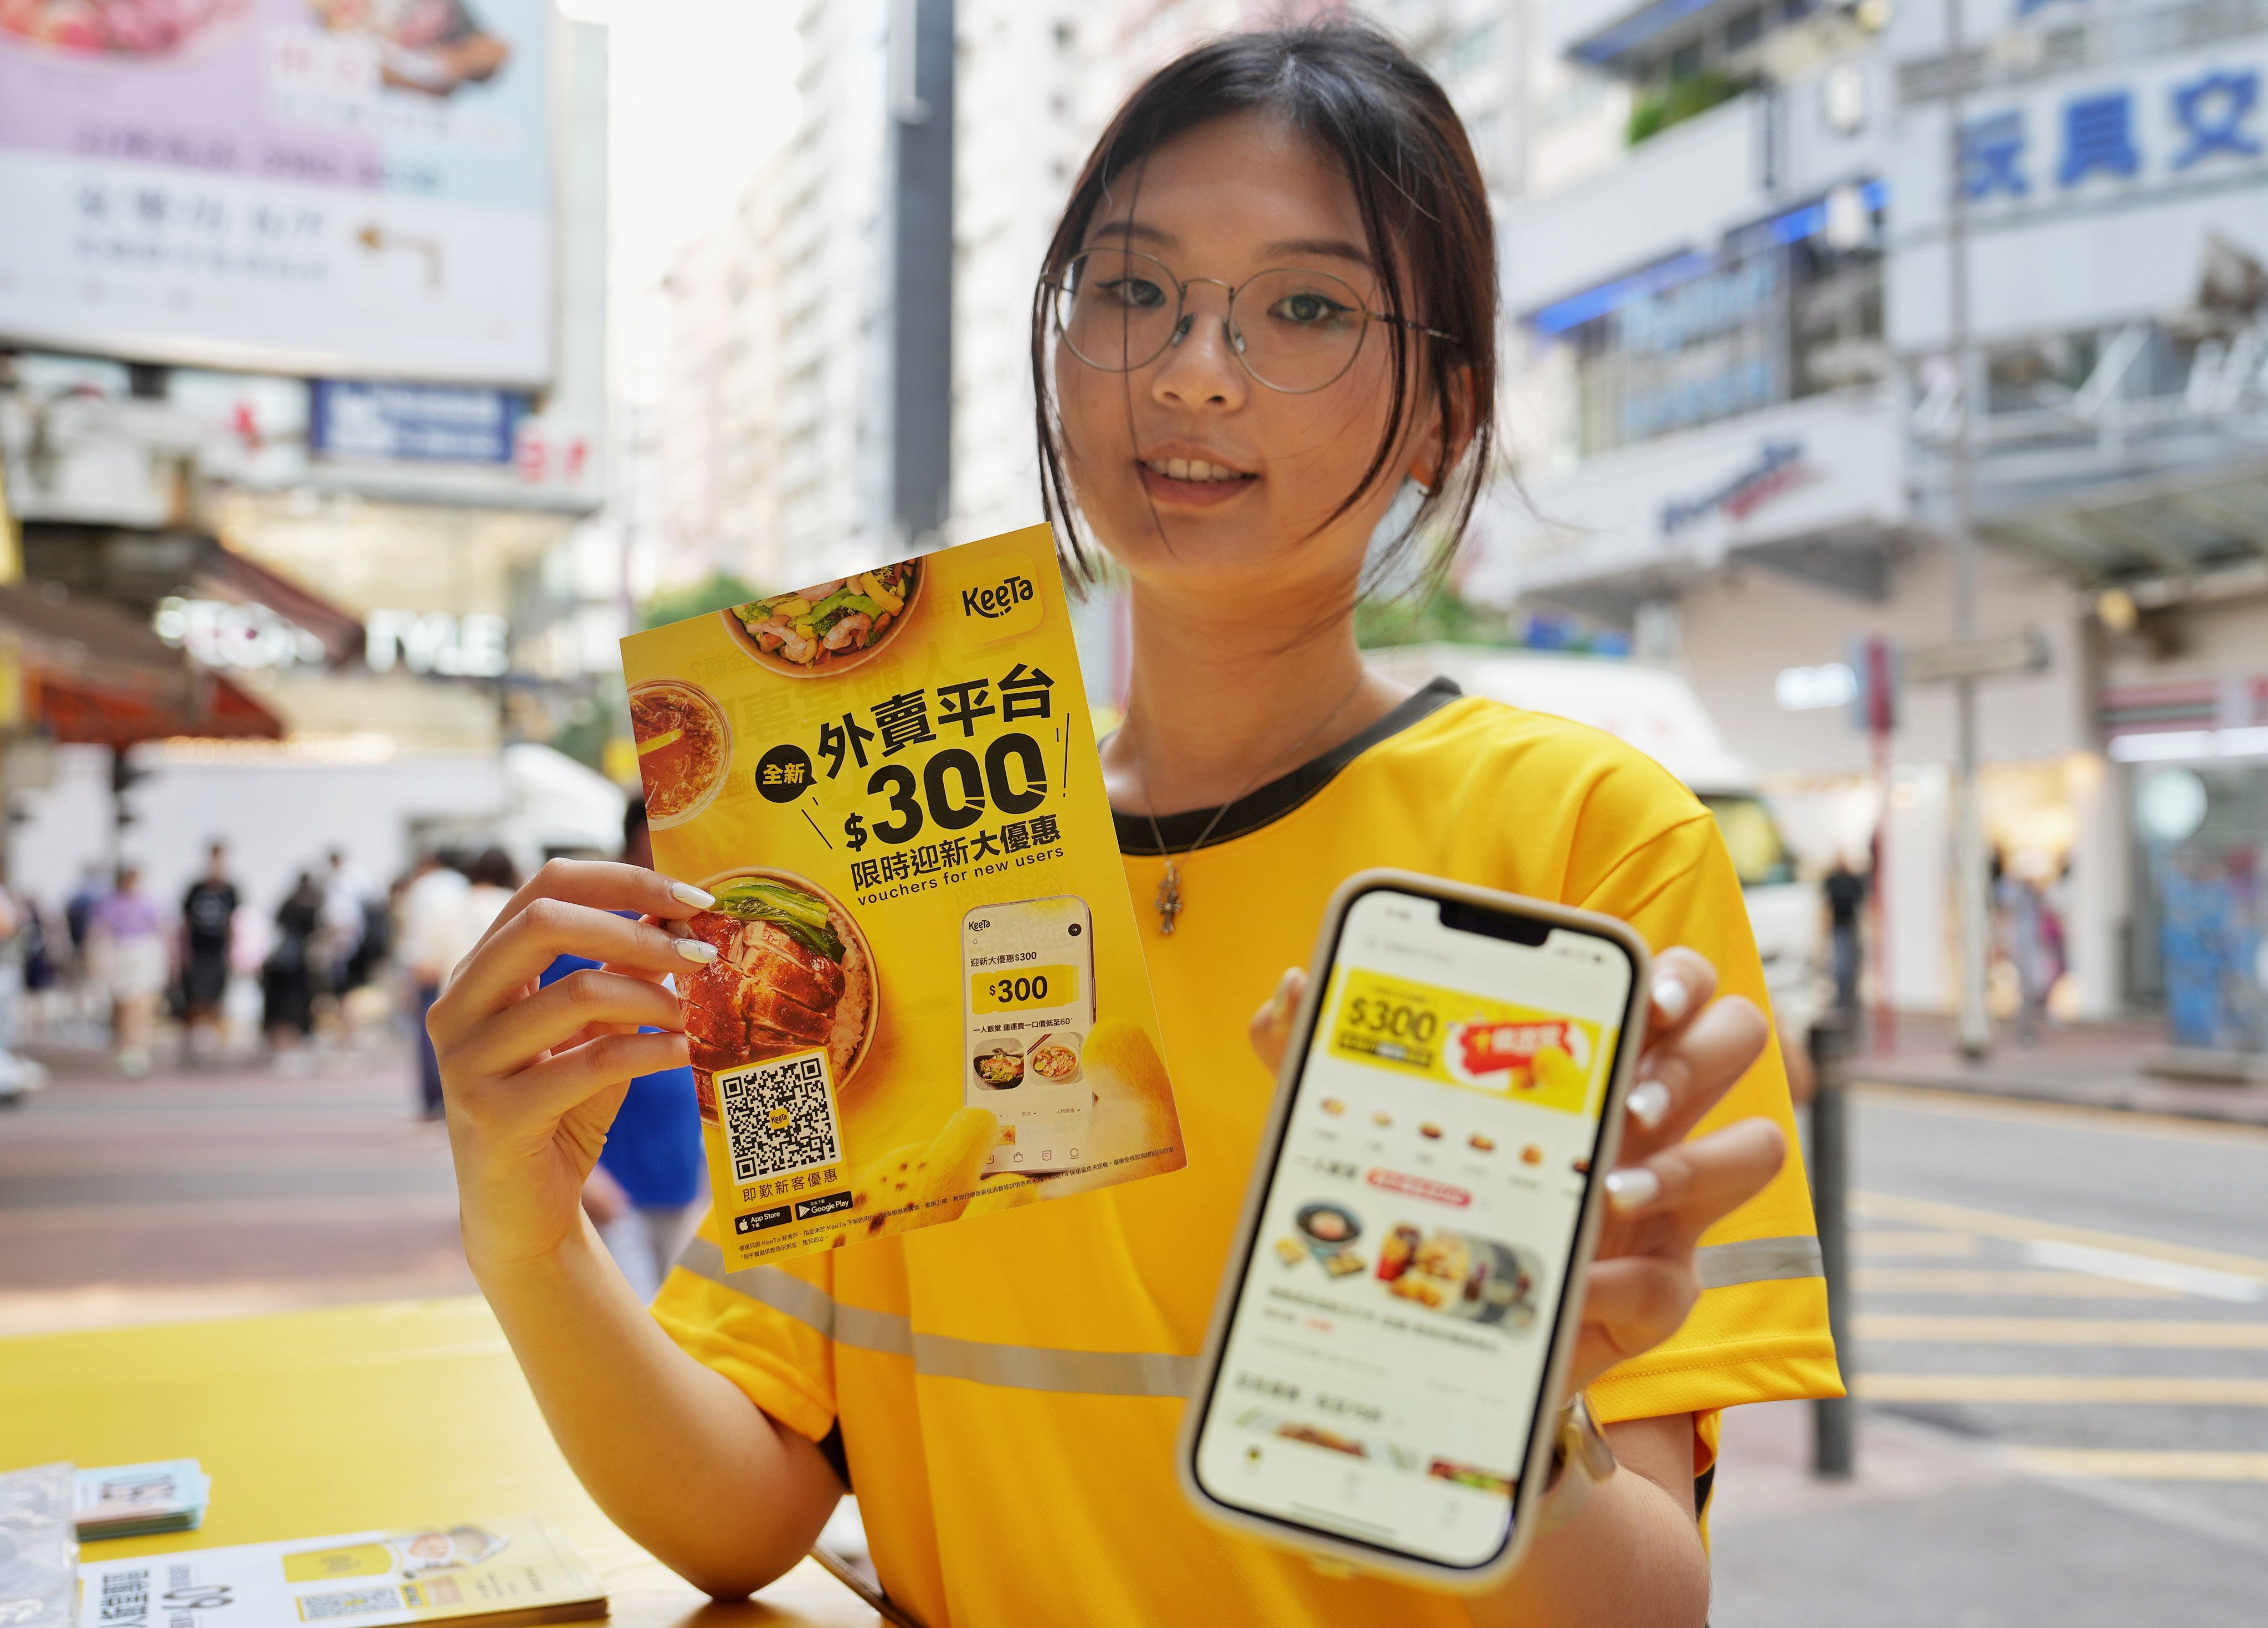 KeeTa staff hit the streets in Mong Kok to promote the new food delivery service. Photo: Elson Li